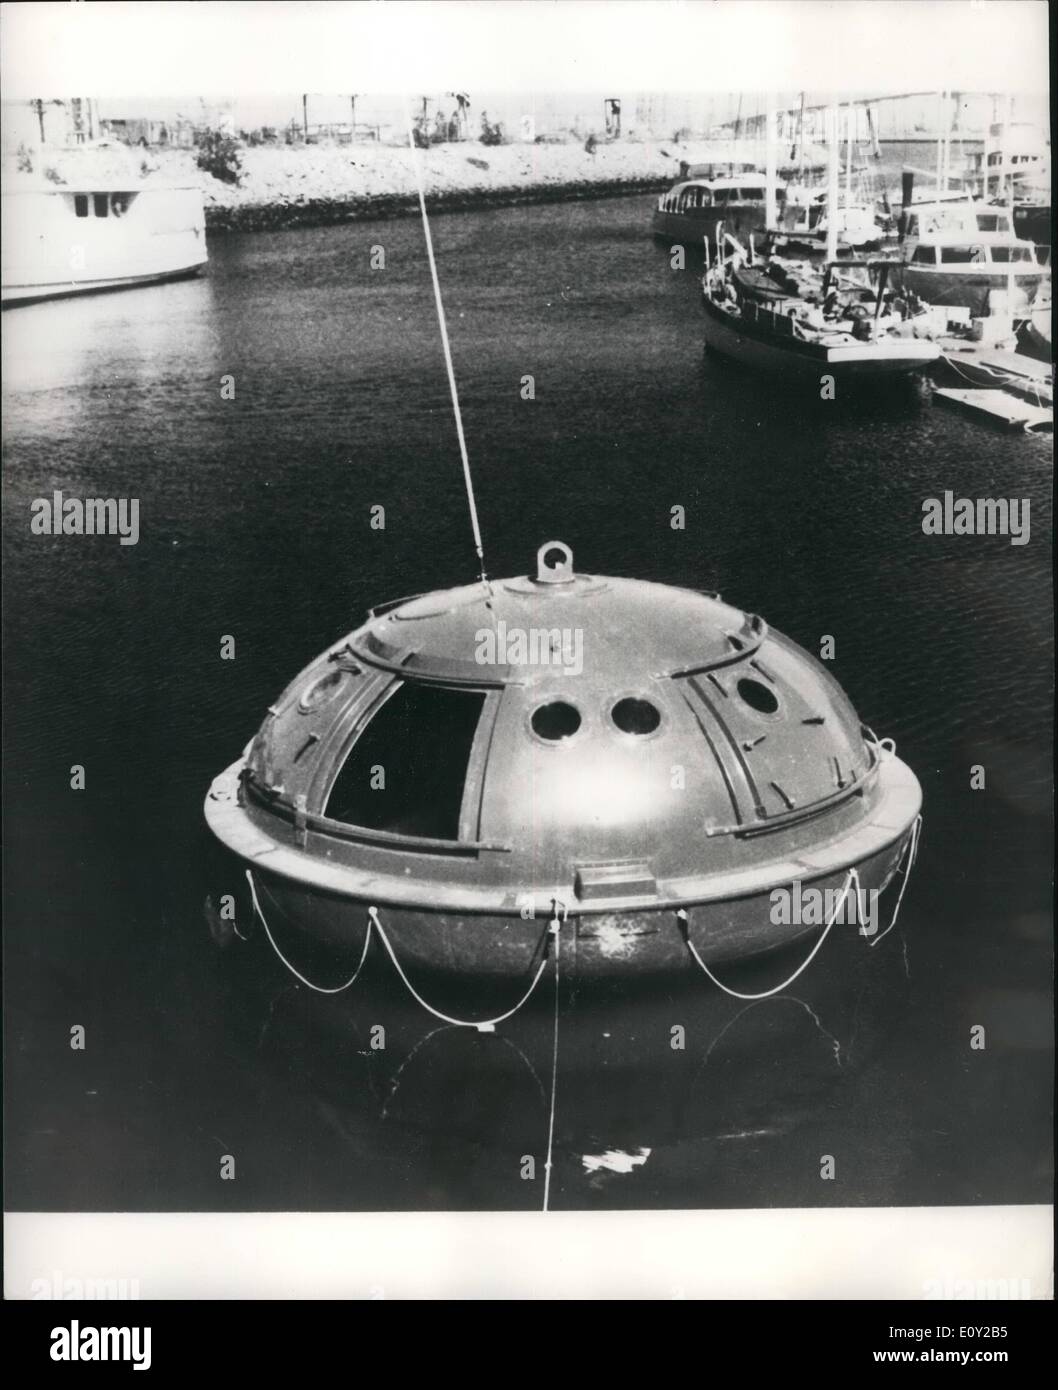 Jun. 06, 1968 - THE BRUCKER SURVIVAL CAPSULE - A MAJOR ADVANCE IN SAFETY AT SEA: The Brucker Survival Capsule is a new departure in the protection of life at sea, conceived to fulfill its mission from the moment of disaster until rescue of its occupants. The 14-feet diameter, lenticular-shaped capsule is fabricated of a fire-retardent fibreglass, impregnated with a radar reflective material, and has a steel centre column for added strength Stock Photo